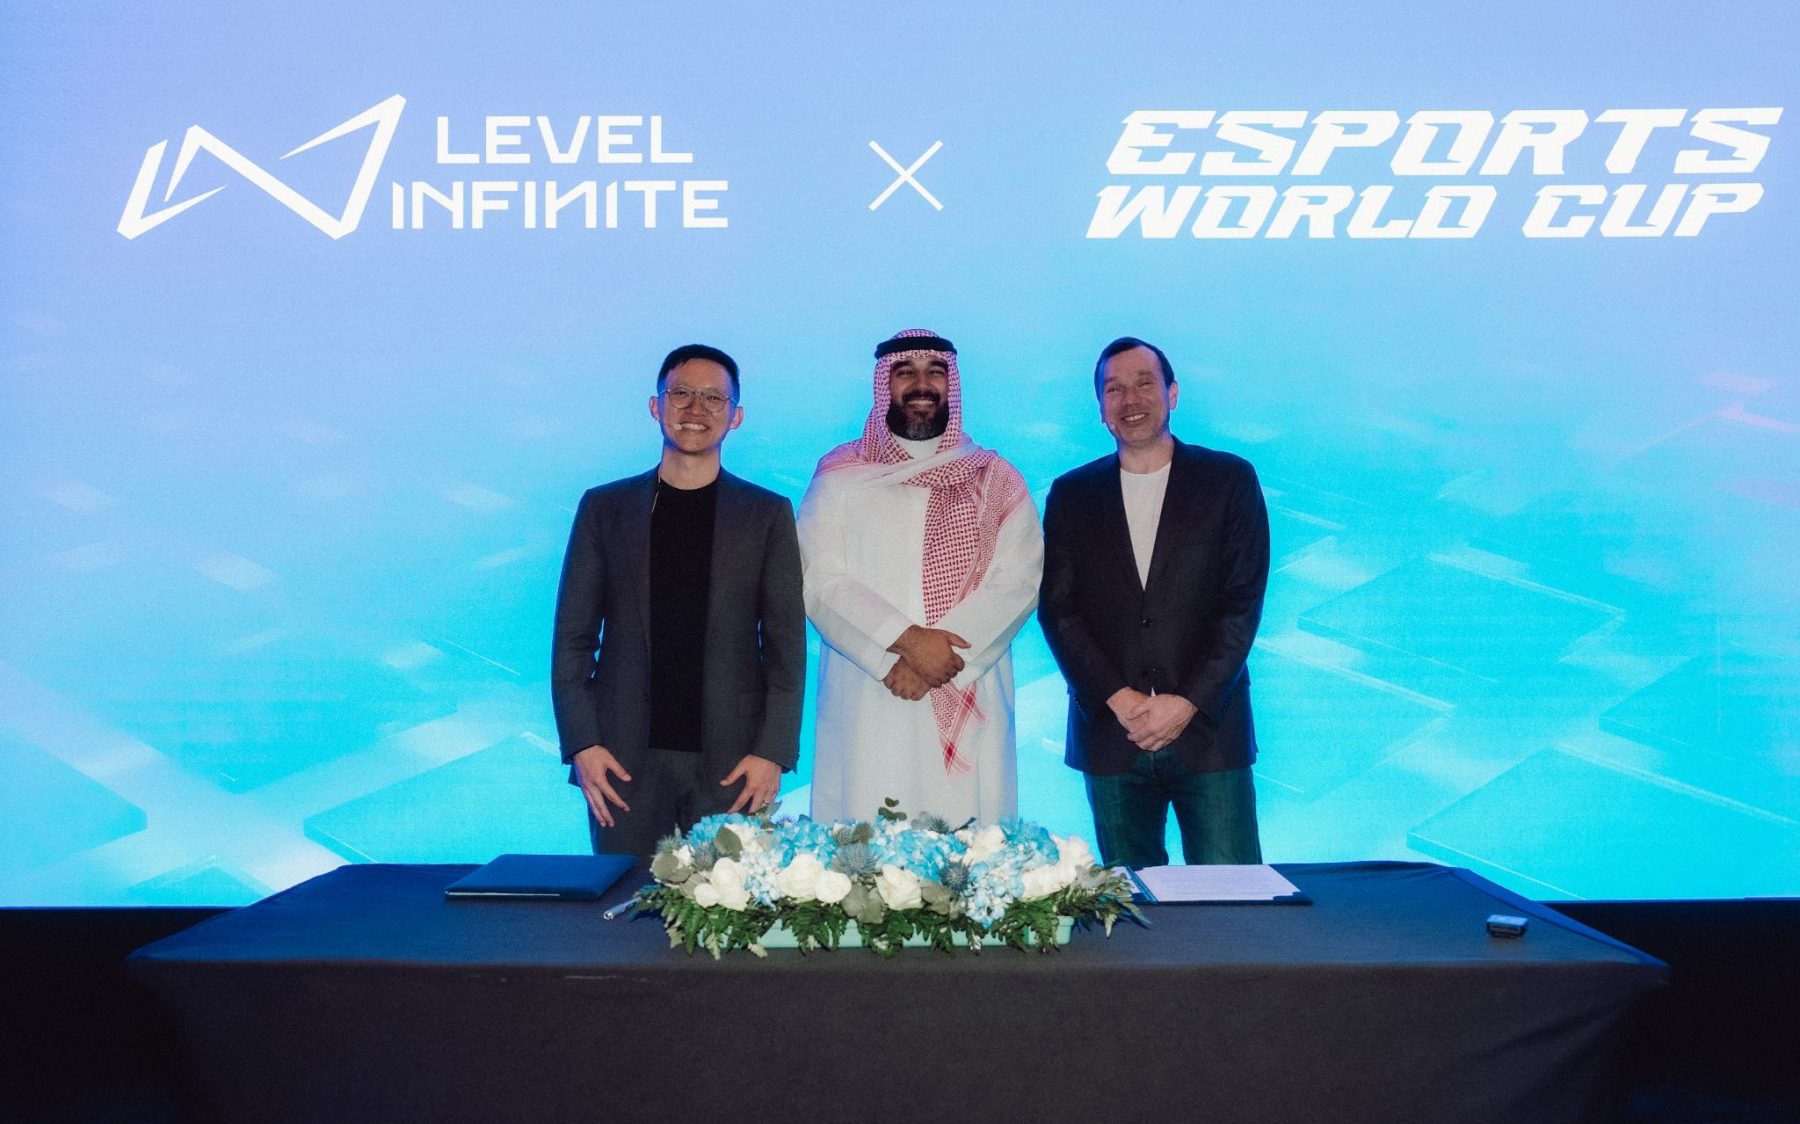 Esports World Cup Foundation partners with Level Infinite